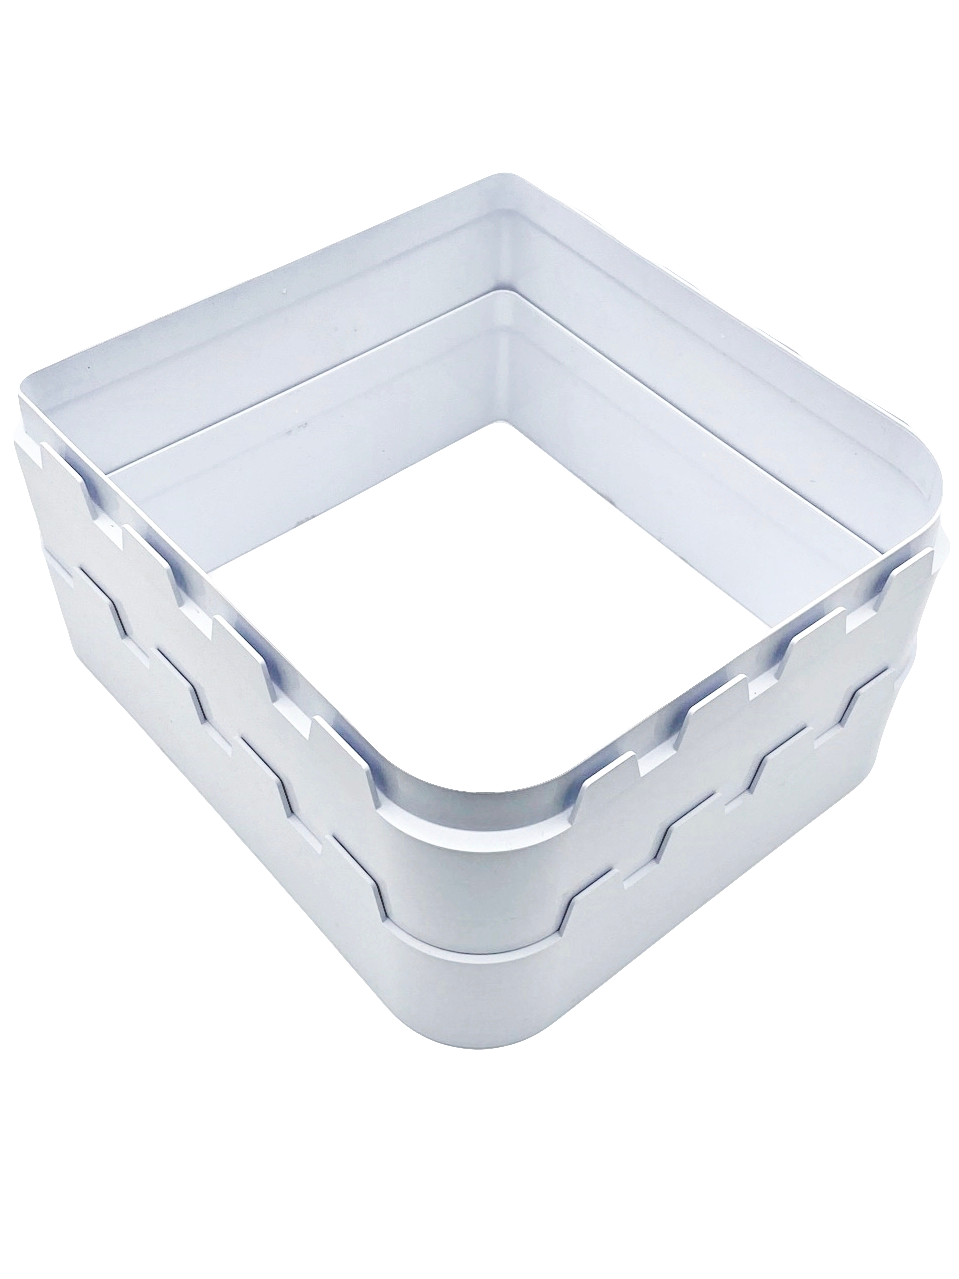 Cat Mate / Closer Pets - Large Pet Flap Wall Liner / Tunnel Section (Part CP400W - For 221, 357 Flaps)